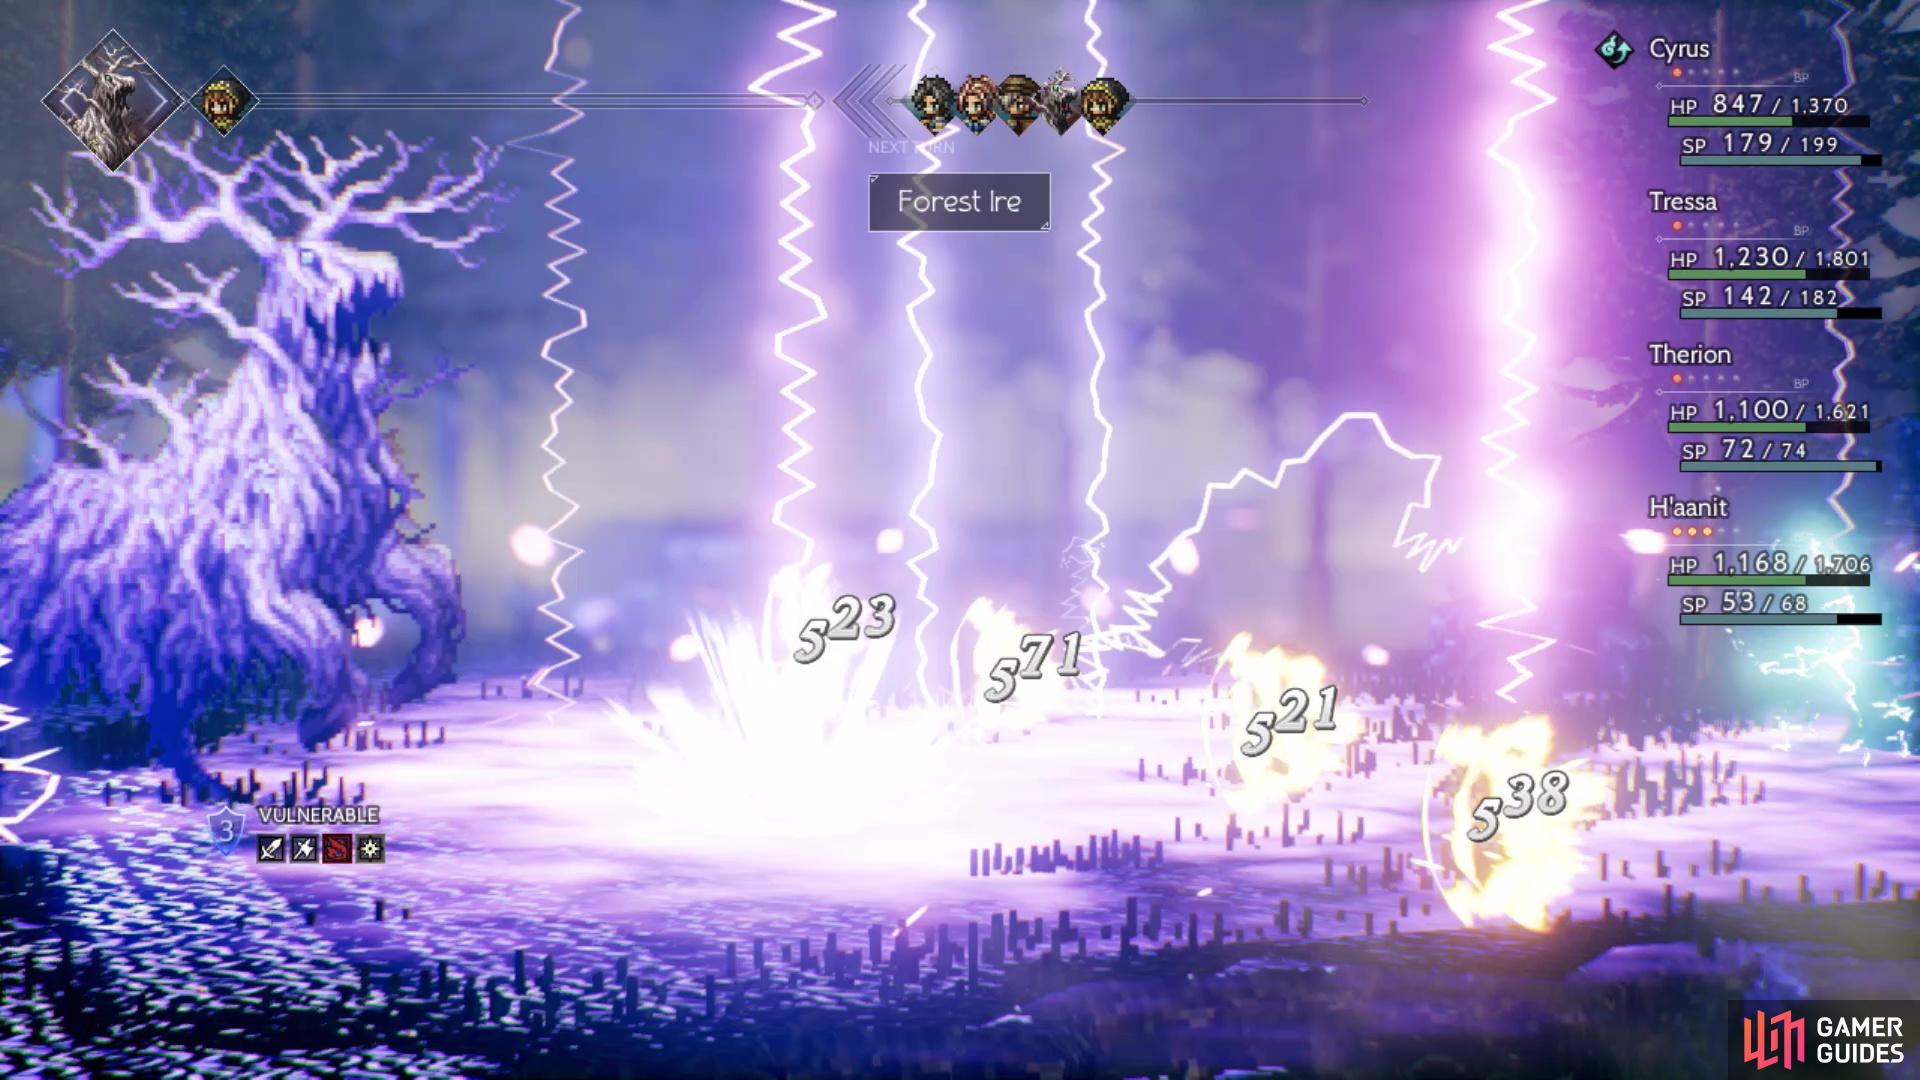 Its ultimate attack is a damaging lightning move on your entire party